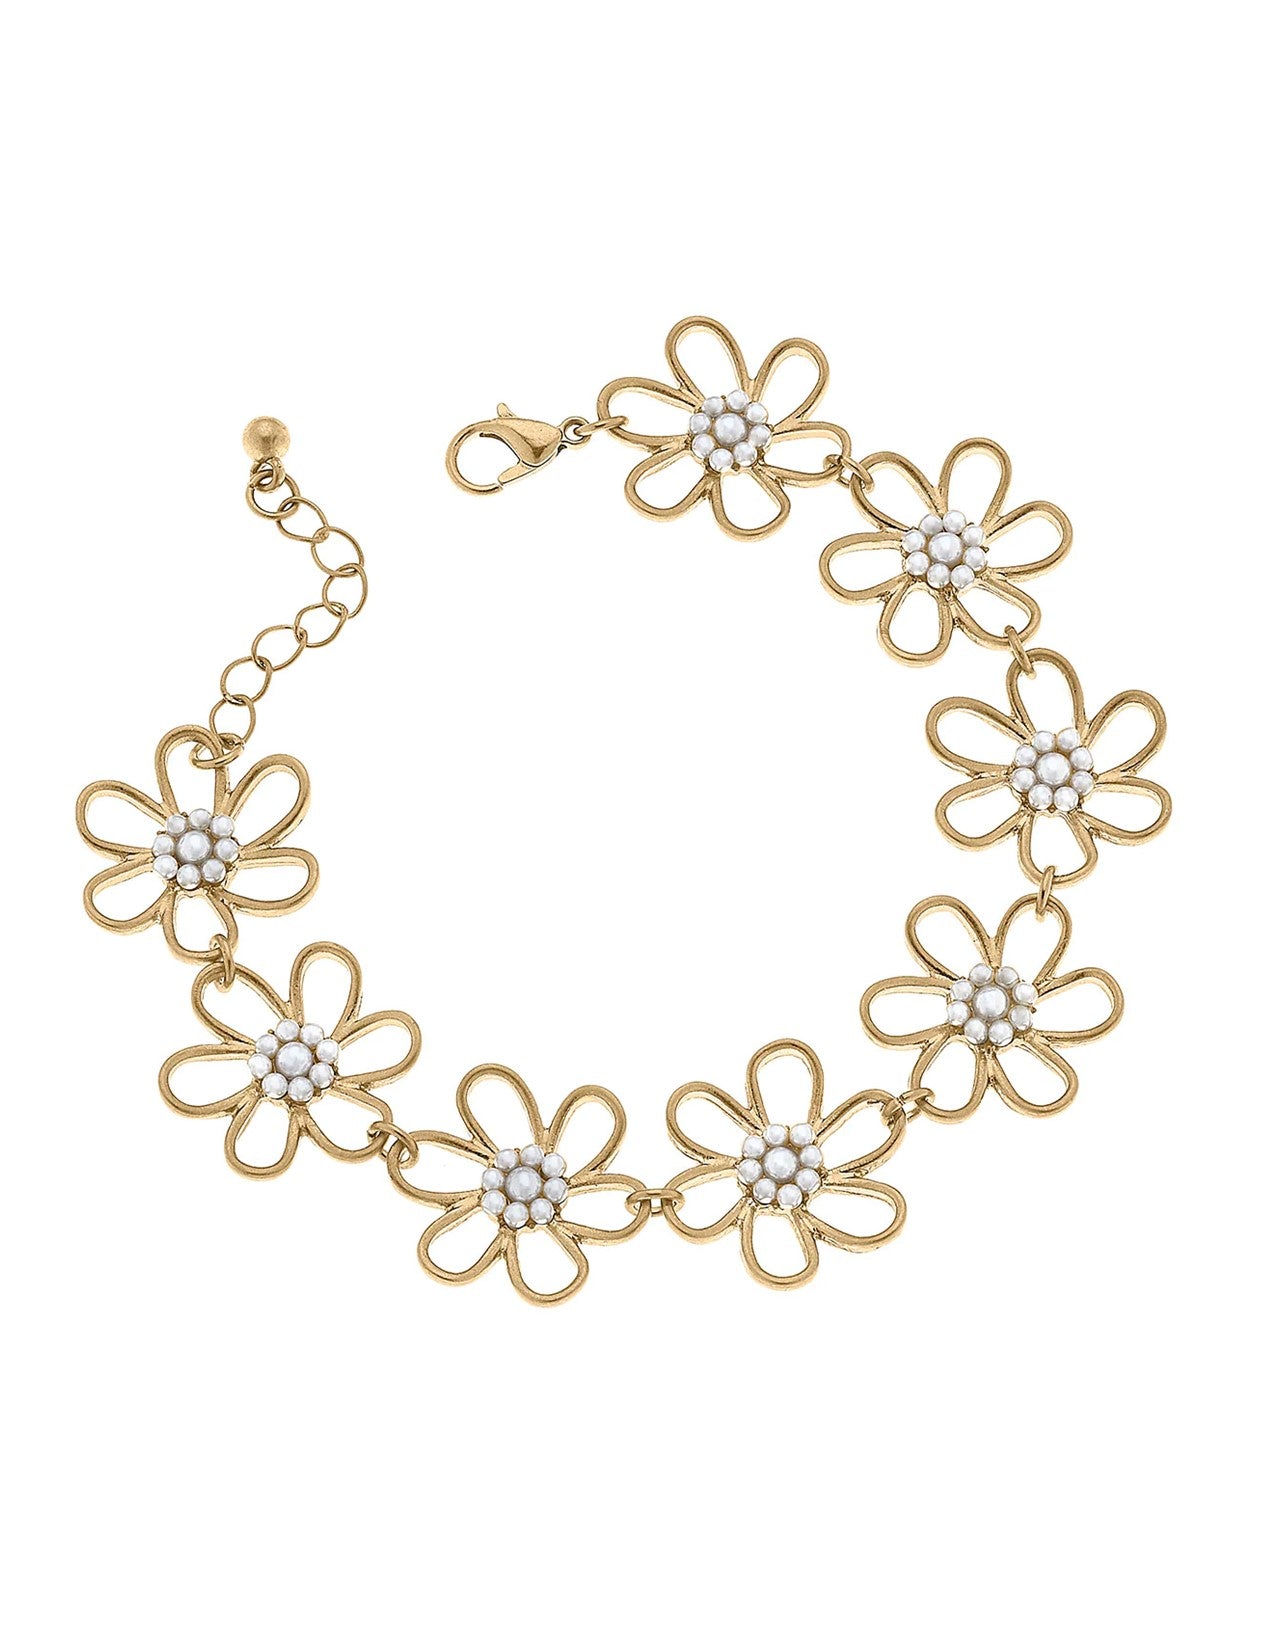 Daisy Linked Flower Bracelet in Worn Gold-Bracelets-Canvas Style-Market Street Nest, Fashionable Clothing, Shoes and Home Décor Located in Mabank, TX